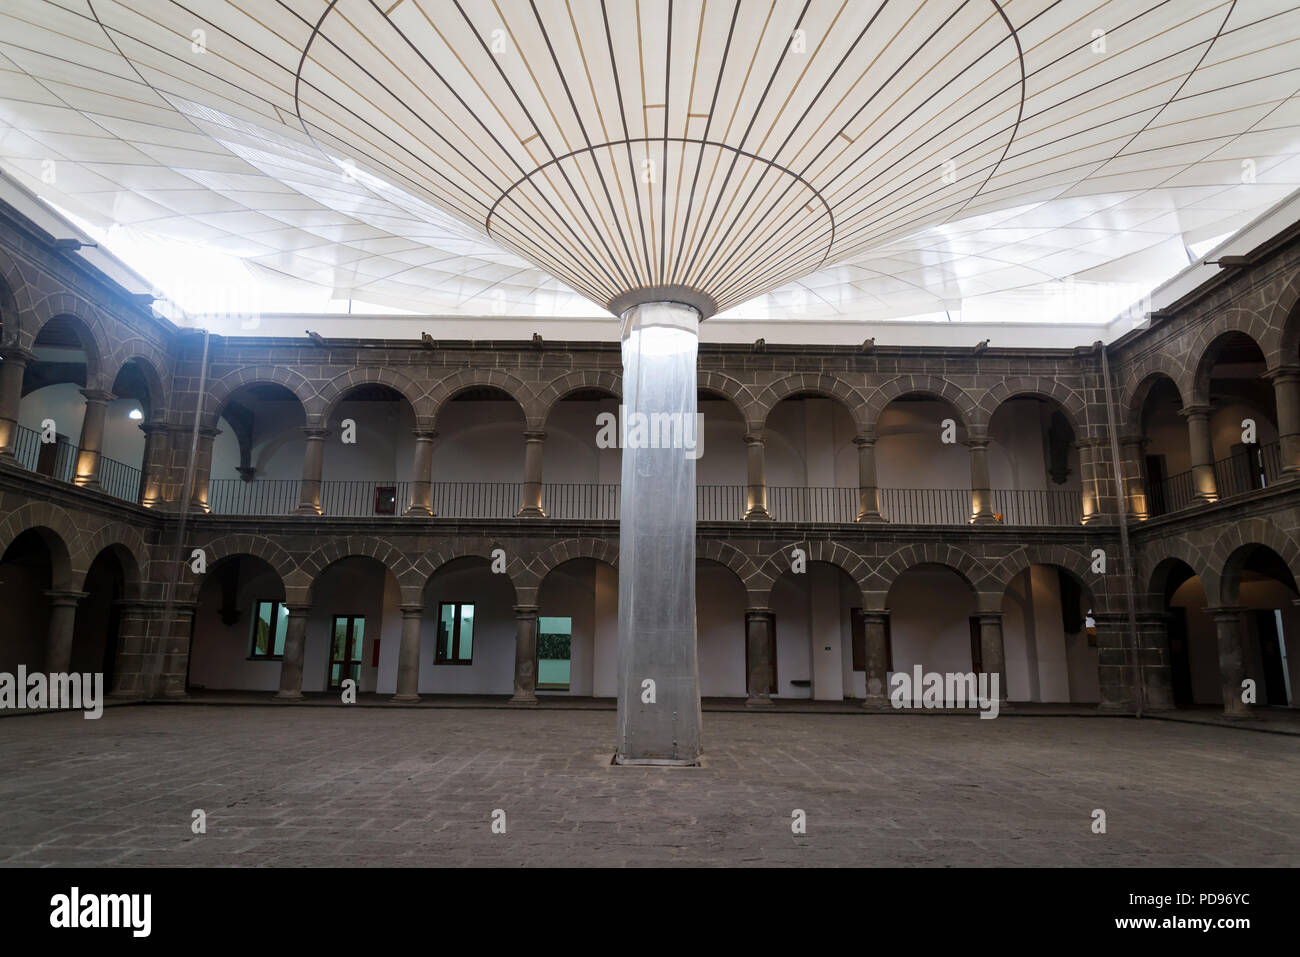 San Pedro Art Museum, located in a former 16th-century hospital, Courtyard with the funnel for collecting the rain from the roof, Puebla, Mexico Stock Photo